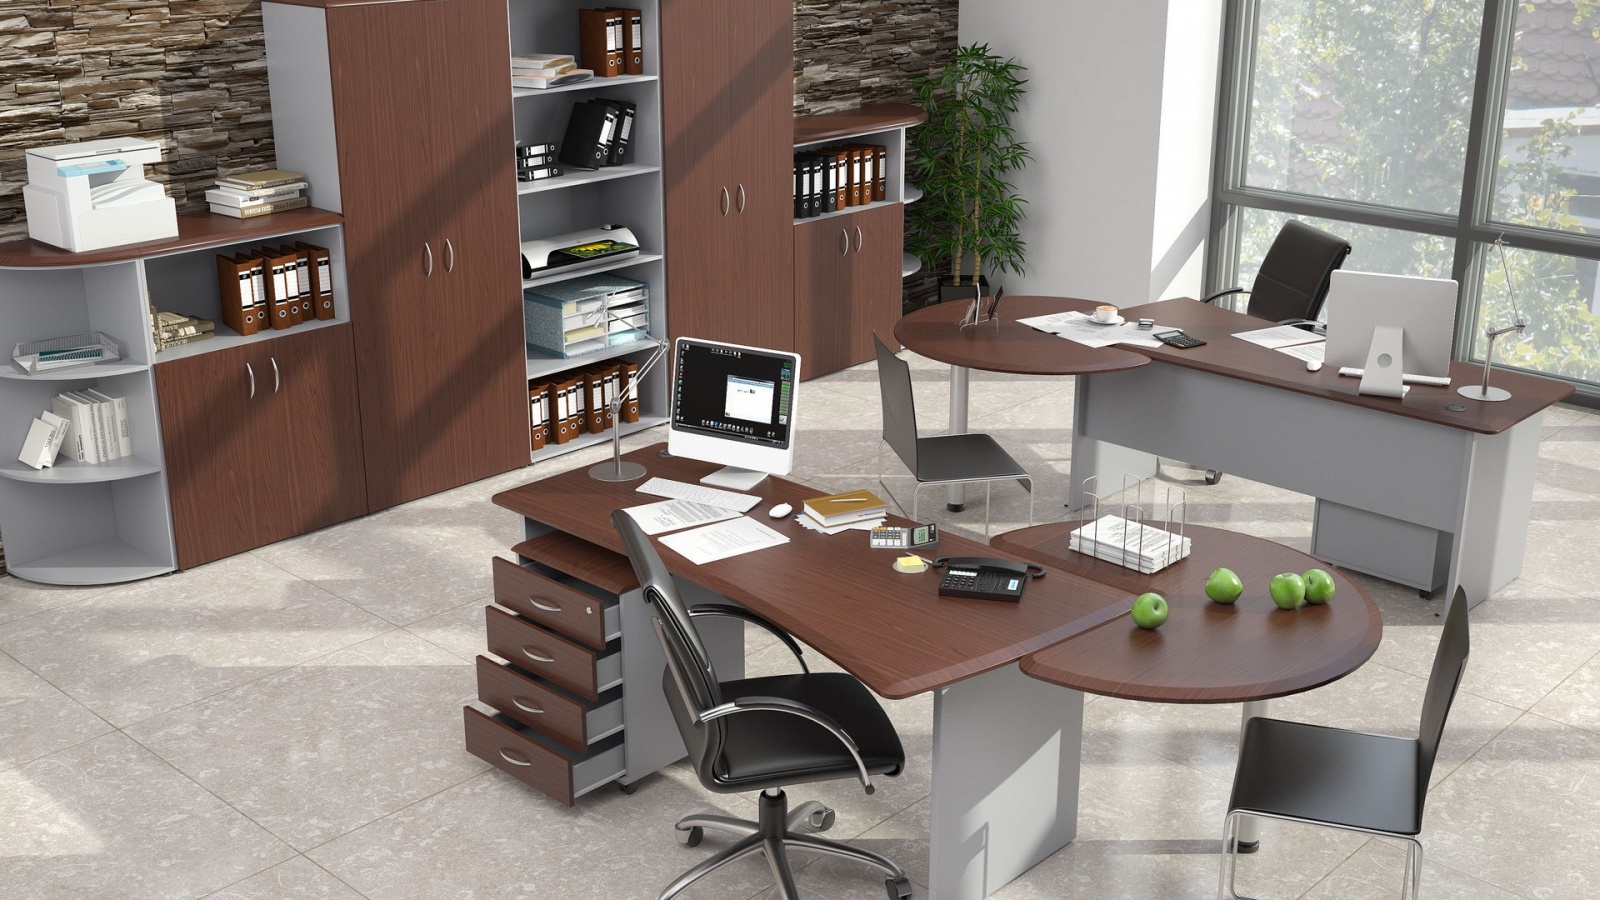 Furniture for staff